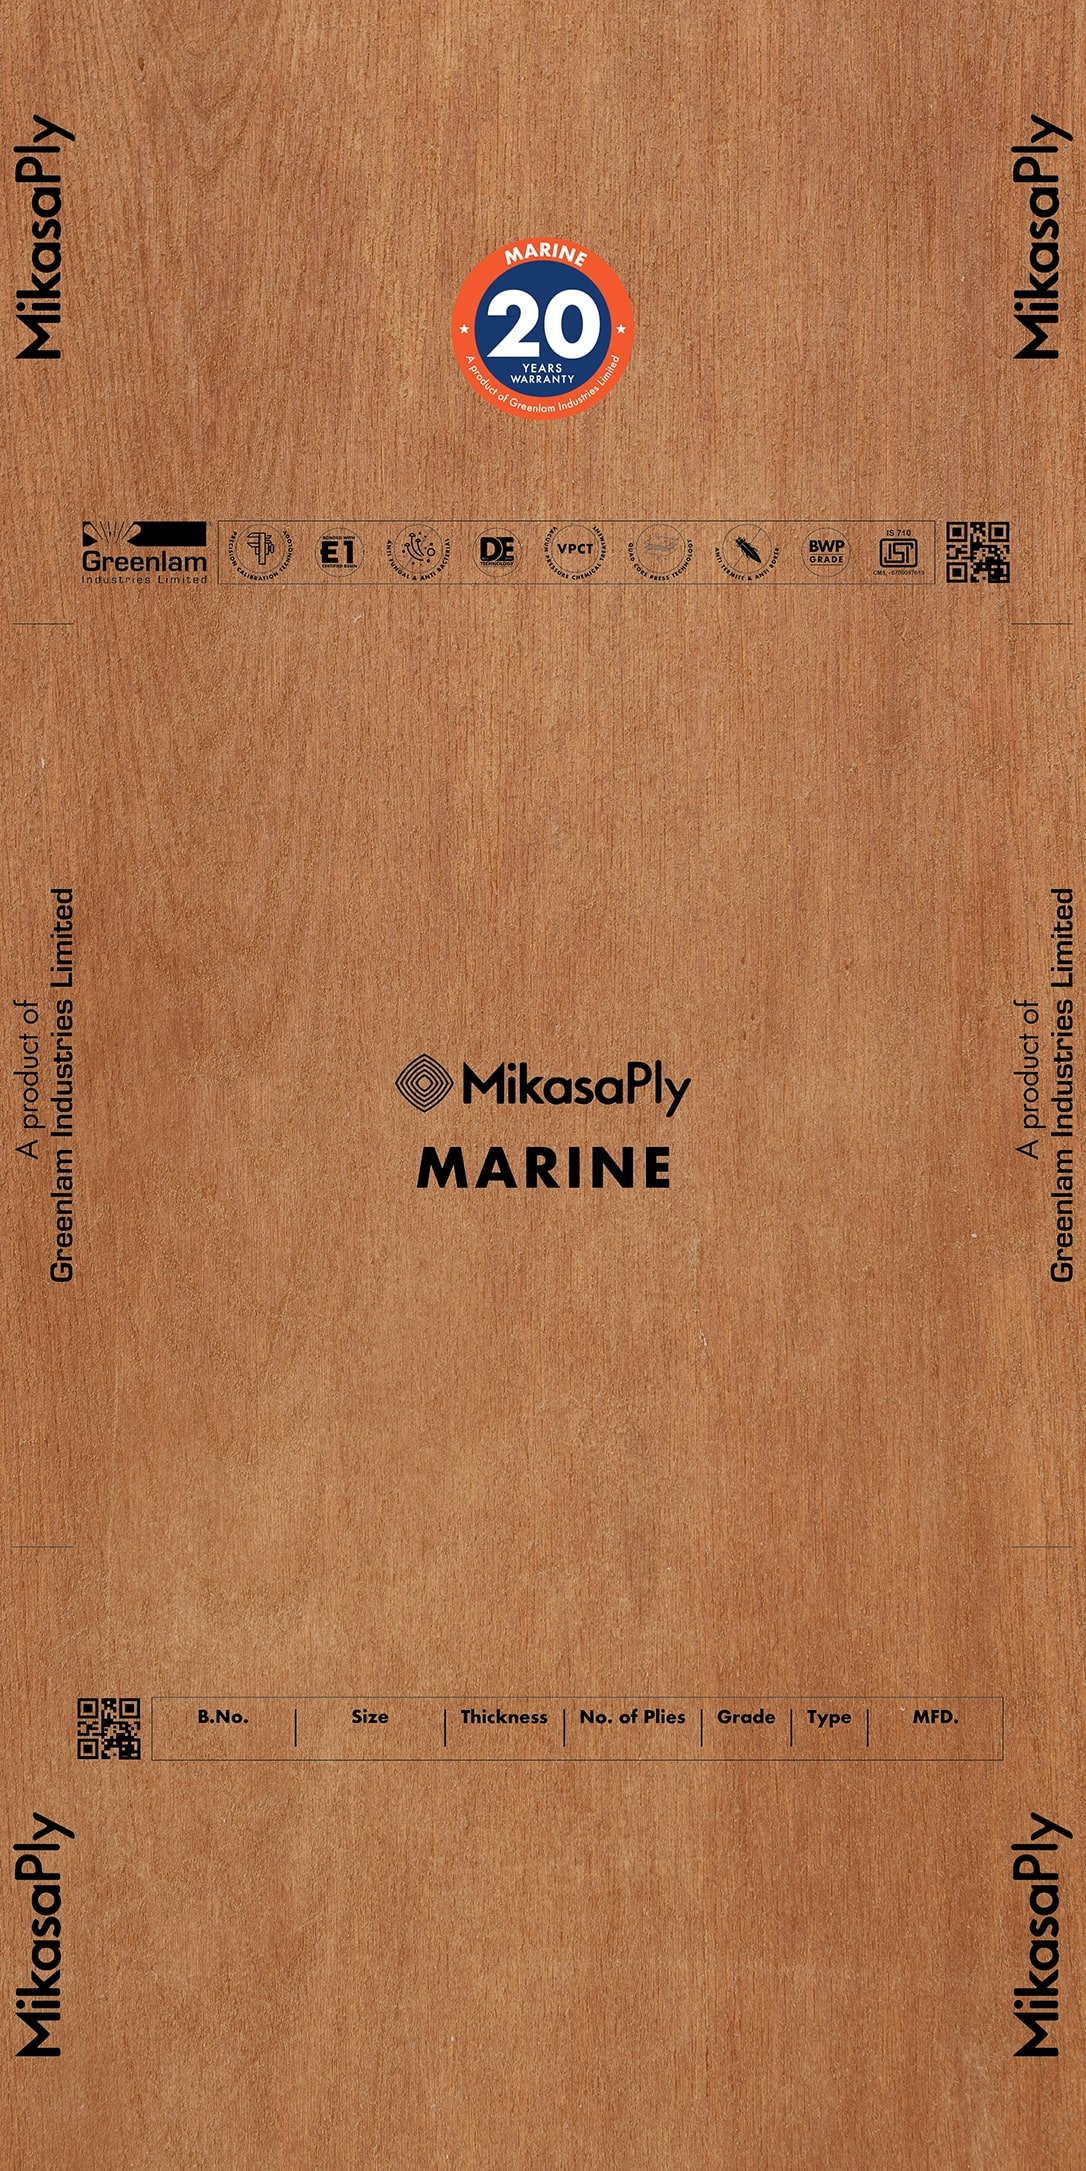 Marine plywood by MikasaPly